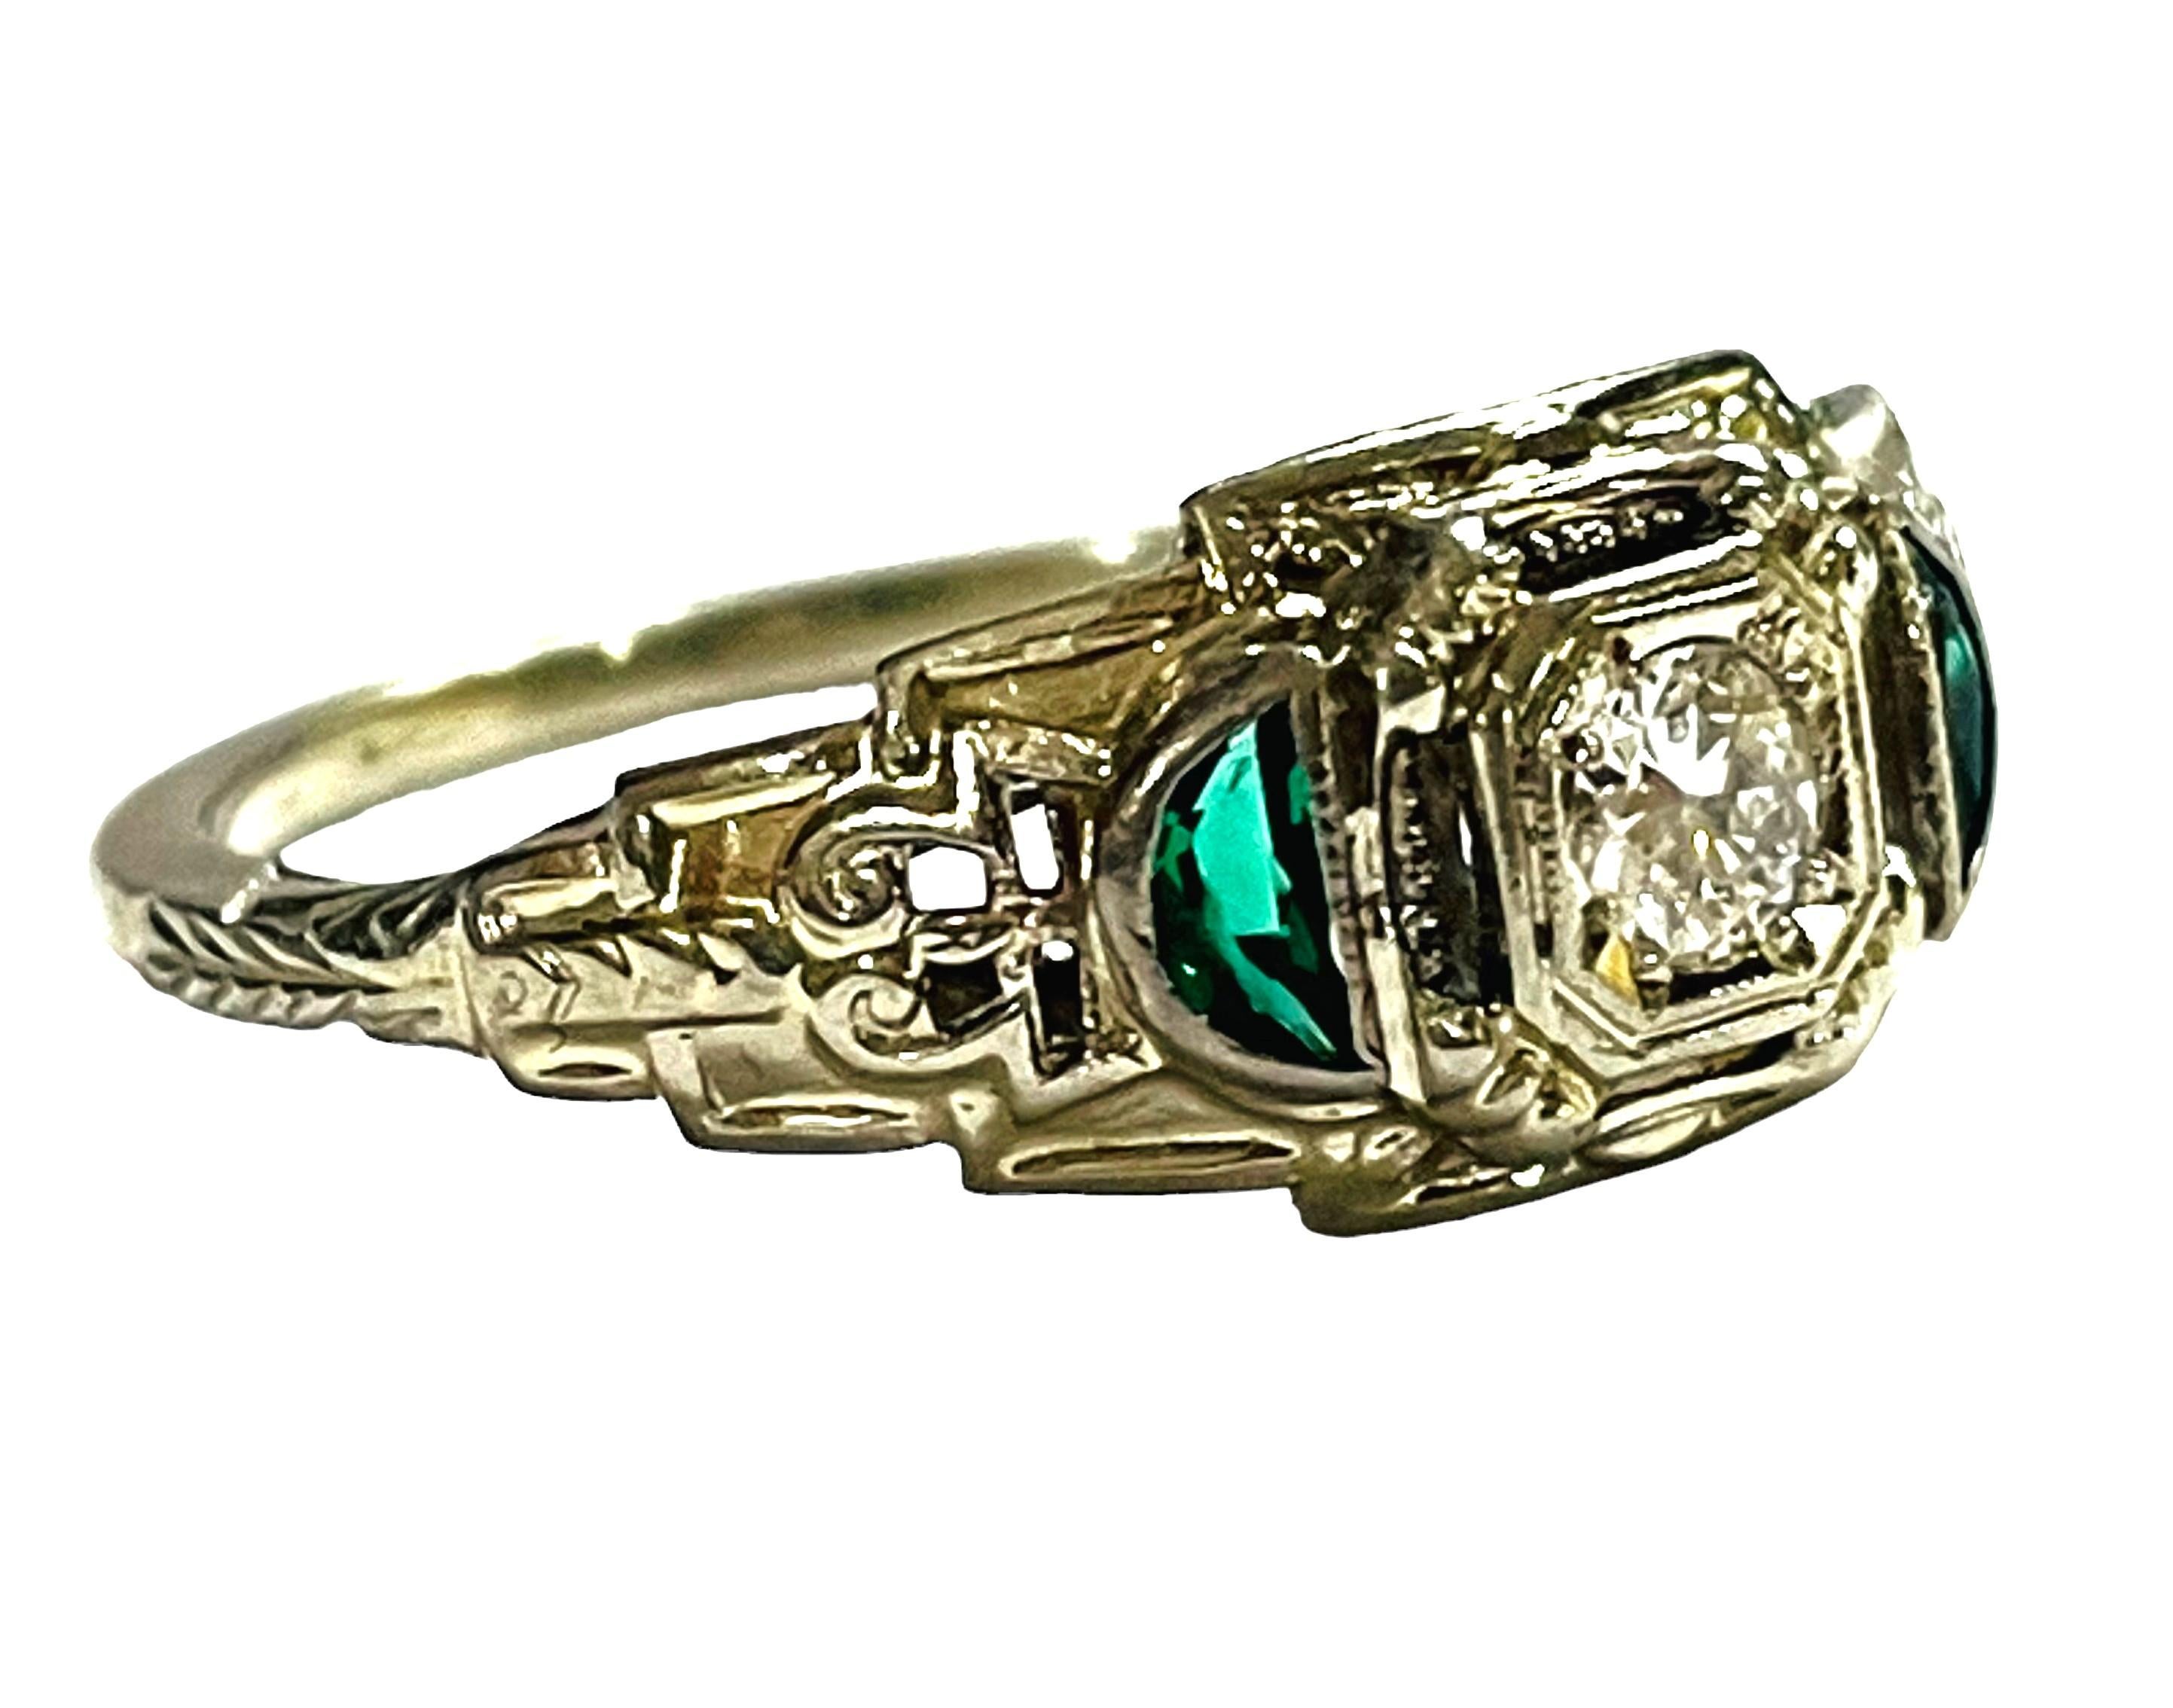 Vintage 18K White Gold Diamond and Emerald Ring with Appraisal 2